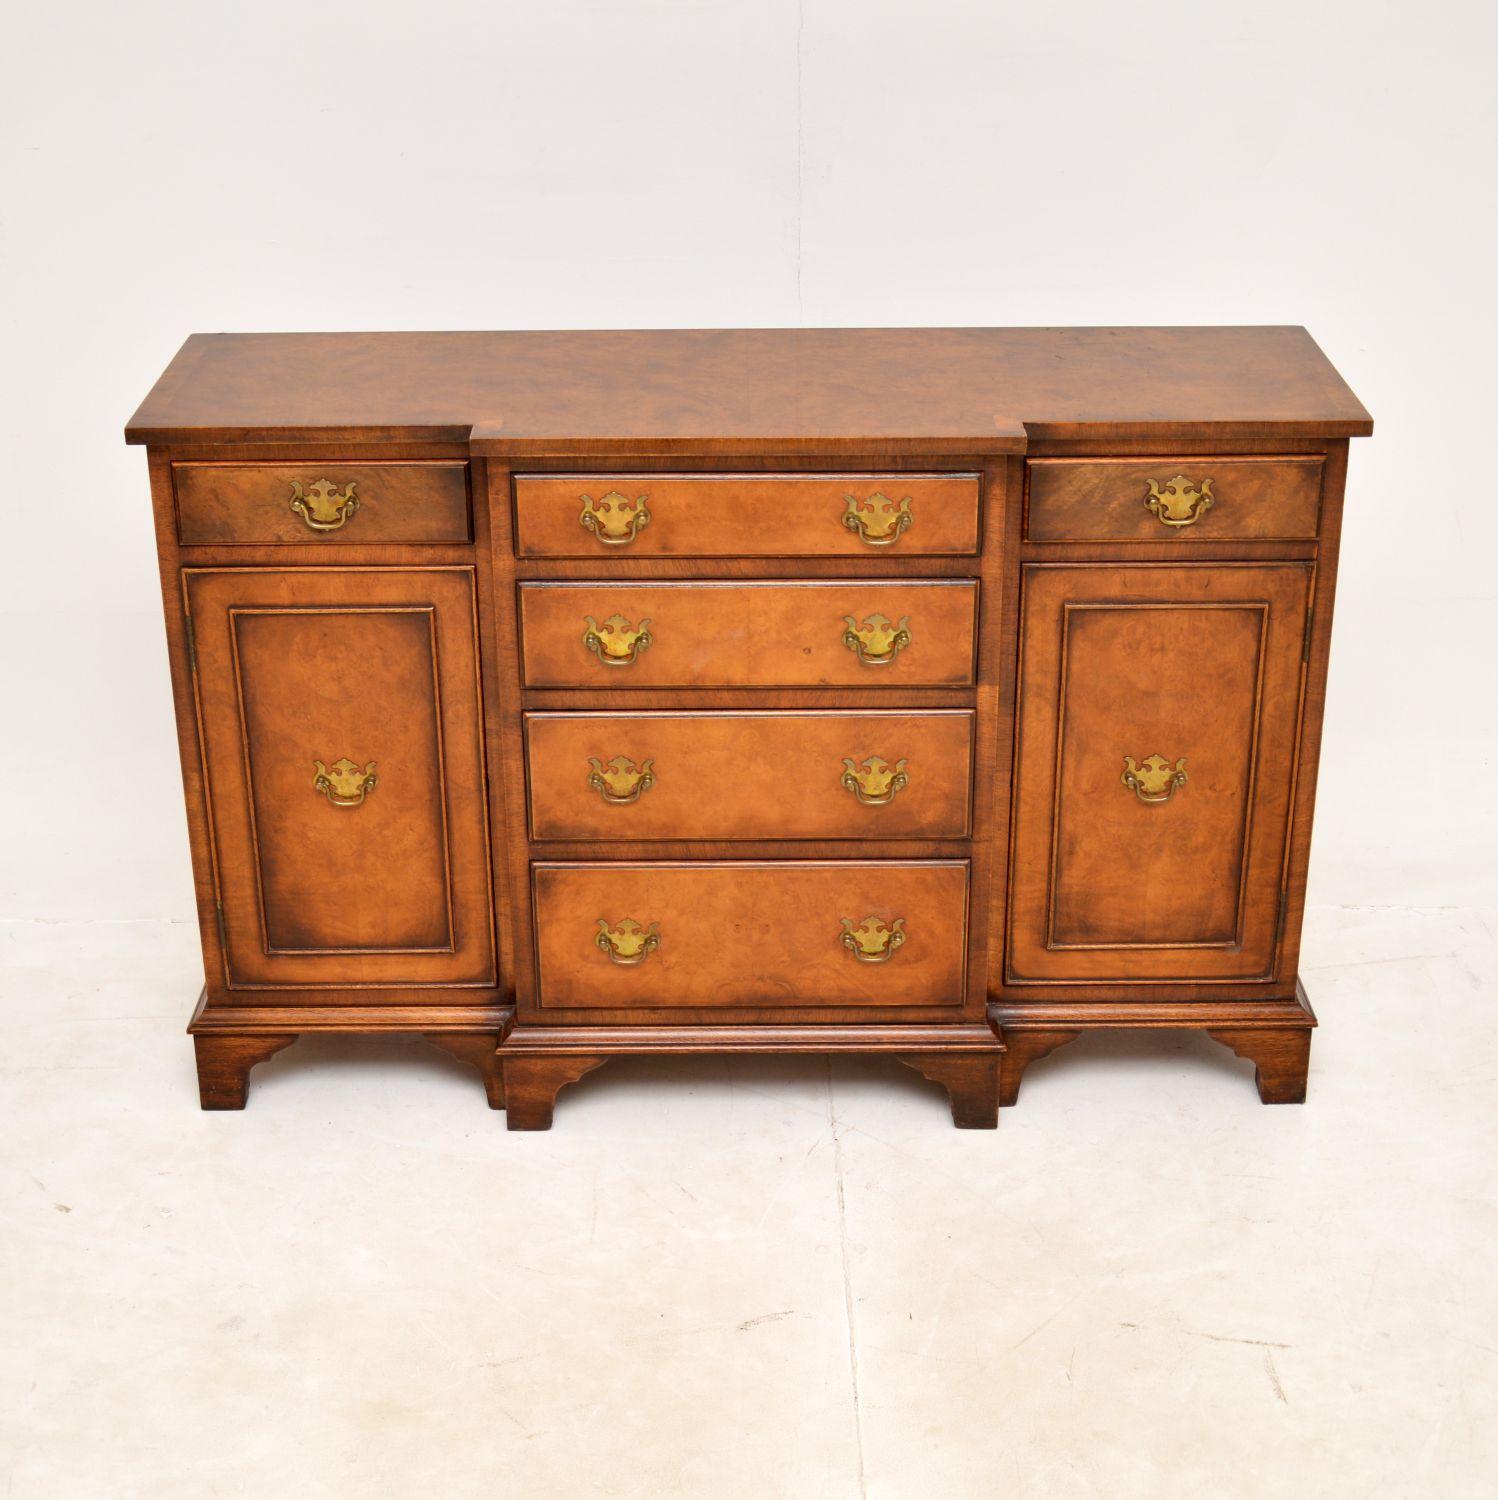 A fantastic and compact breakfront sideboard, beautifully made from burr walnut. This was made in England, it dates from around the 1930s period.

It is a very useful size and has a very smart design. The quality is superb, with gorgeous burr